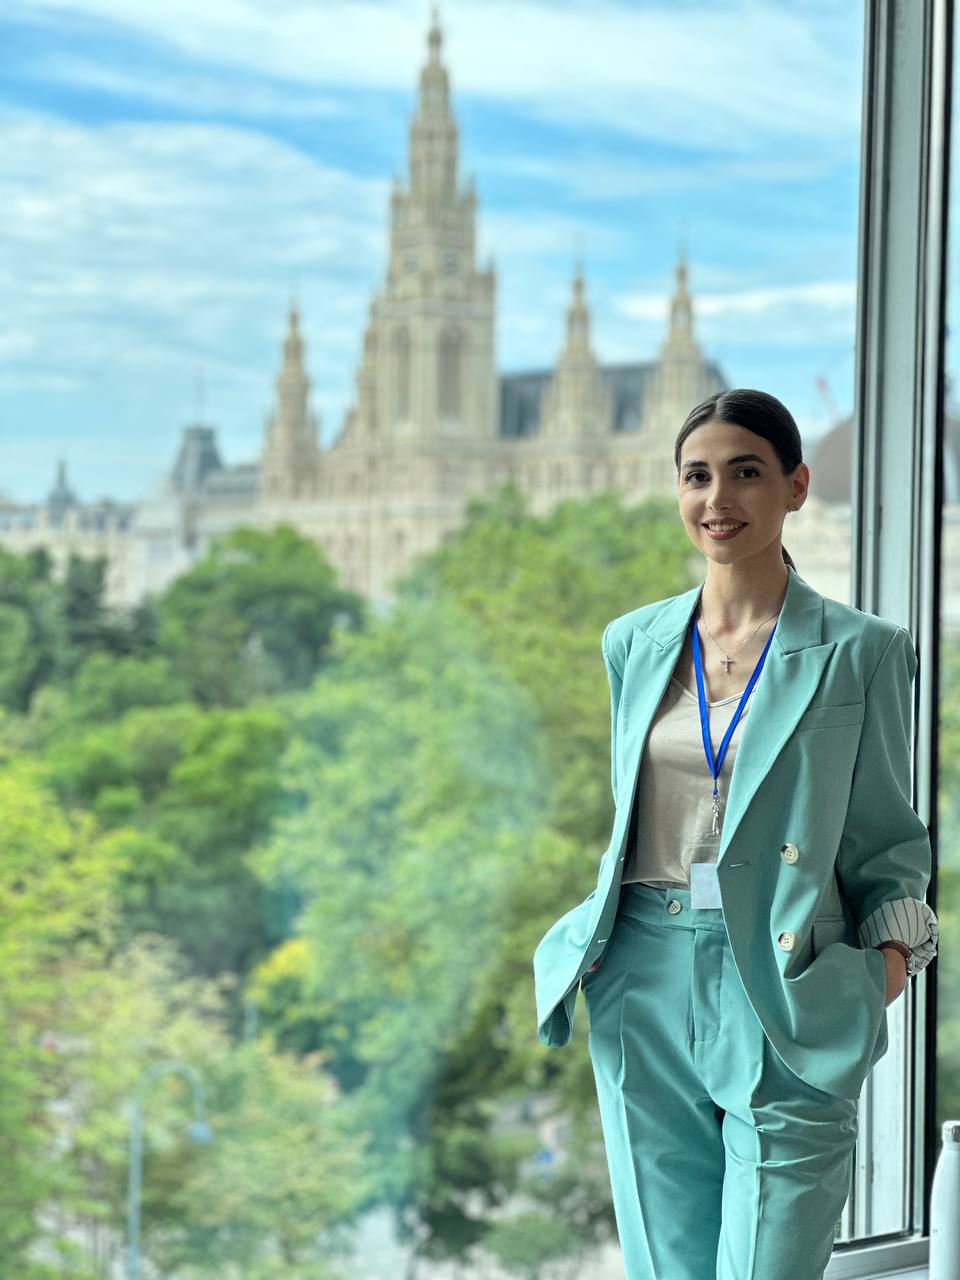 The senior lawyer of our Law Firm, attorney Gohar Avagyan participated in the Vienna Elsa Summer Law School for dispute resolution